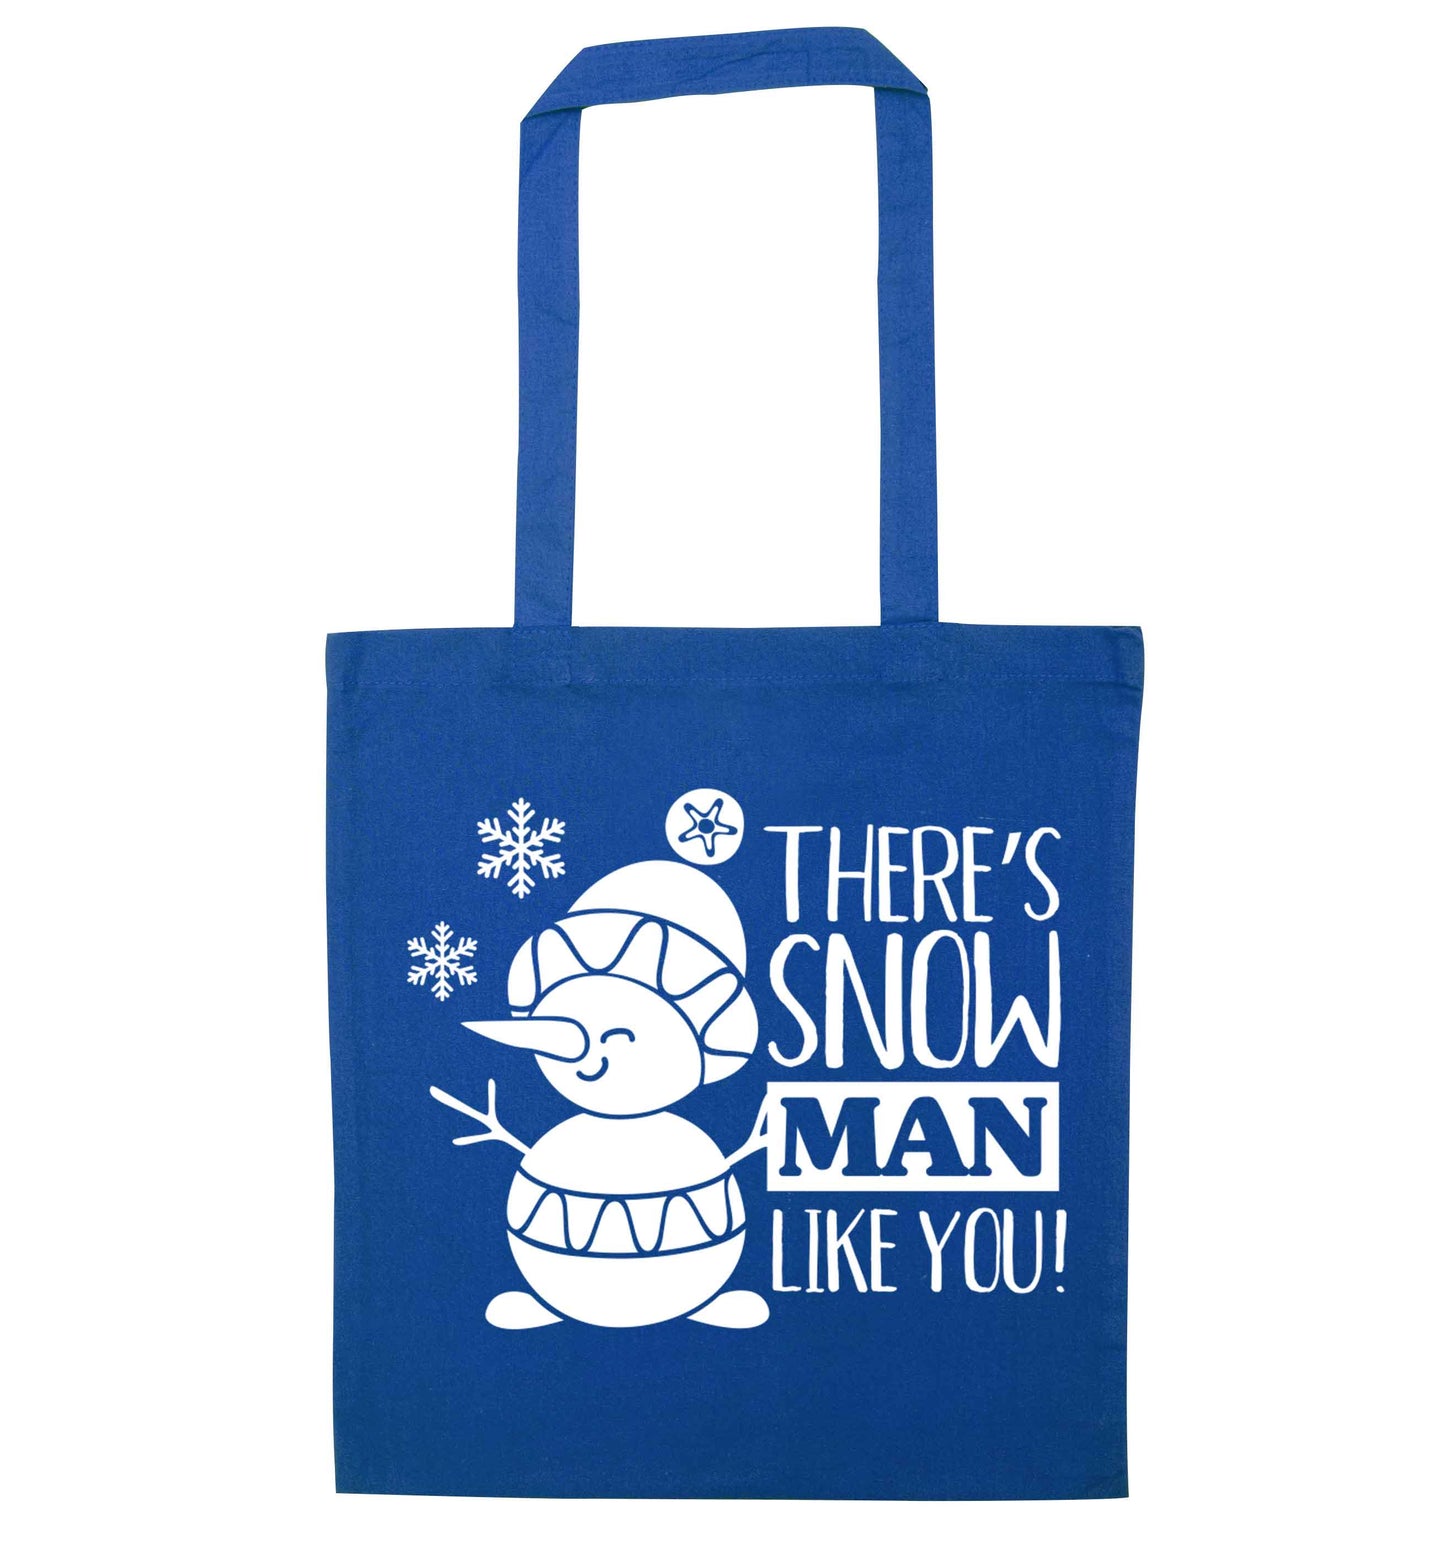 There's snow man like you blue tote bag